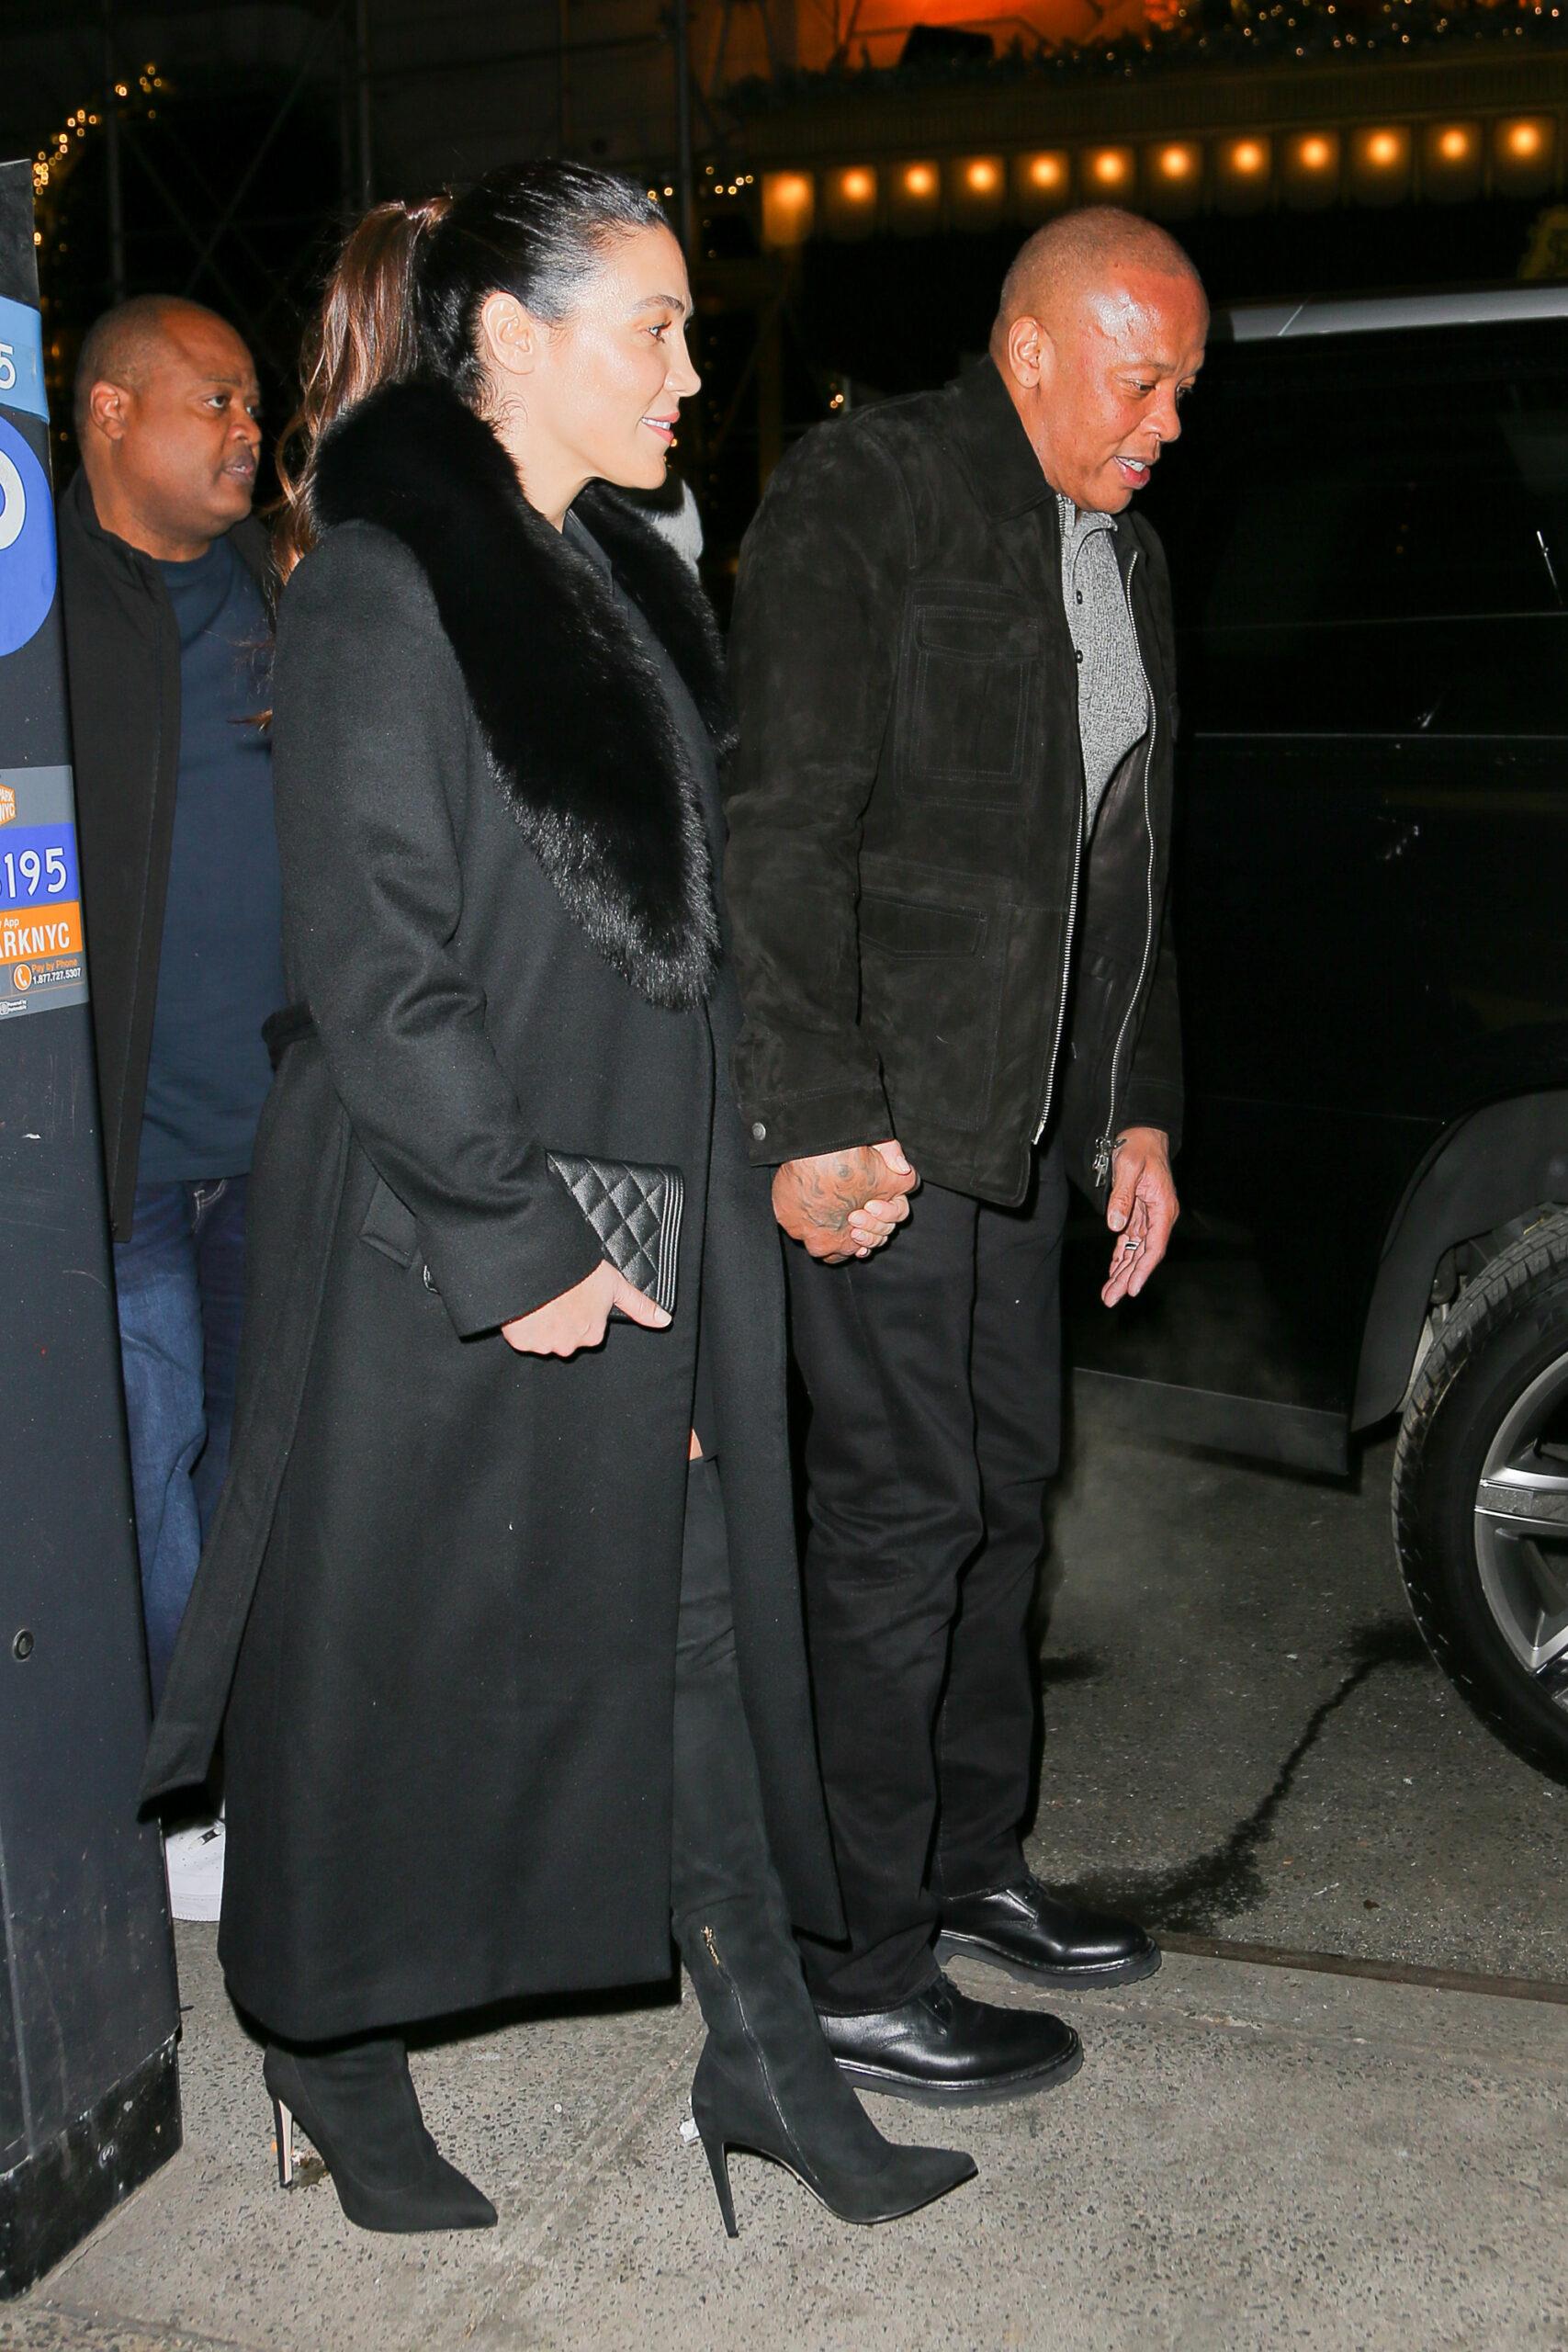 Dr Dre and his wife Nicole Young seen leaving the Polo Bar in NYC